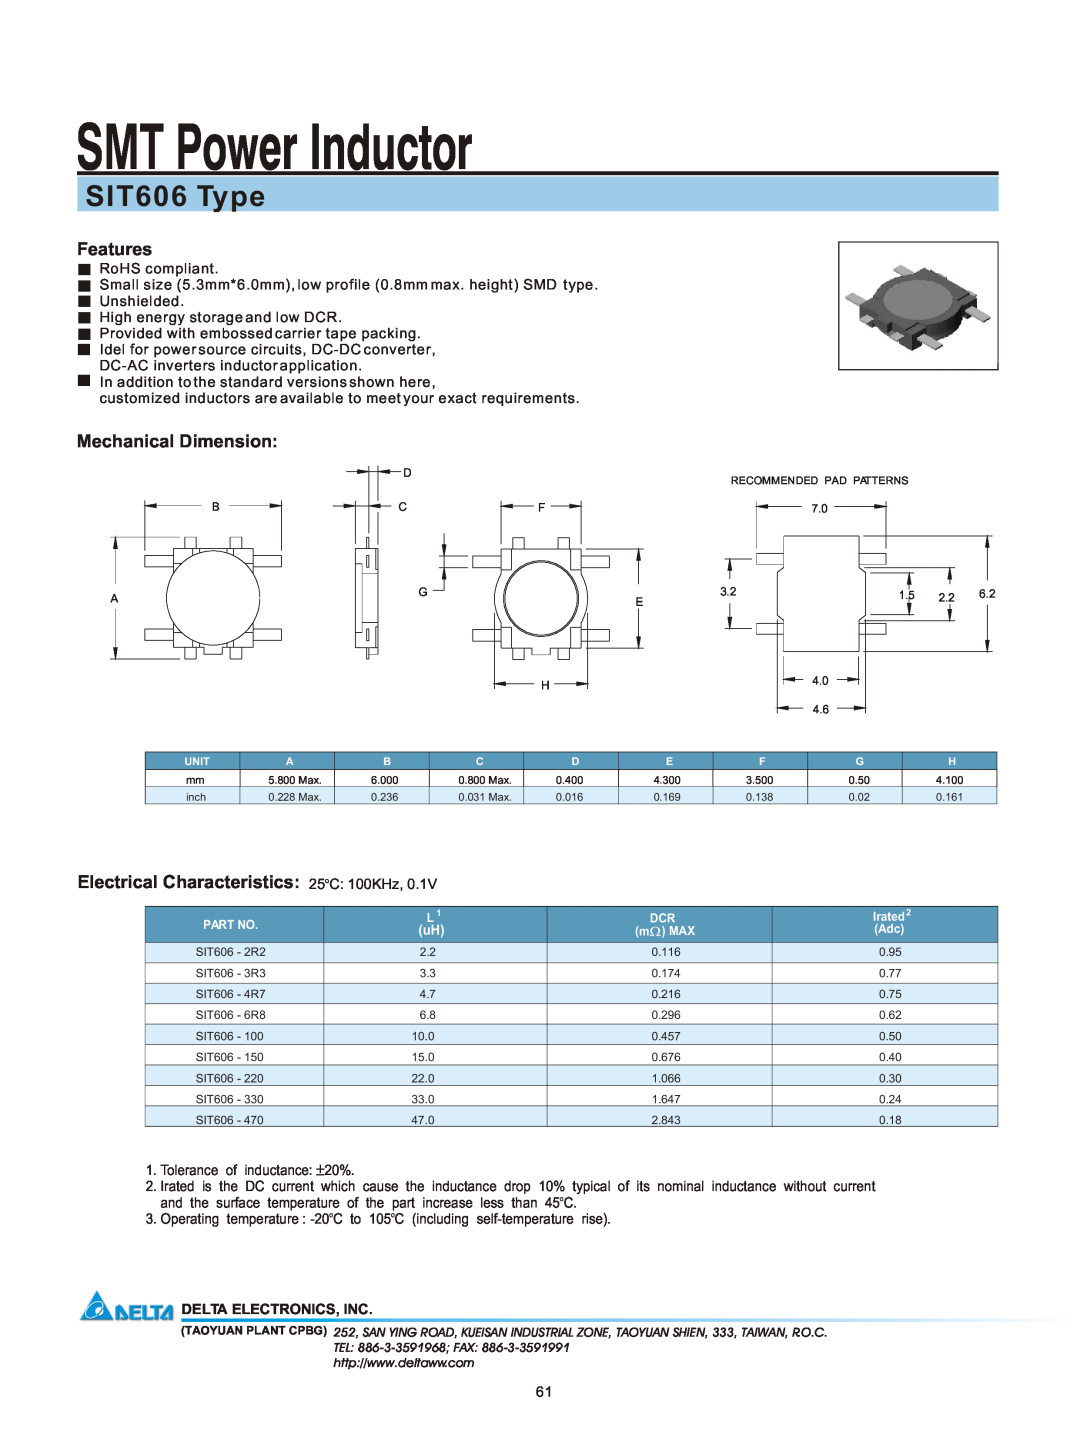 Delta Electronics manual SMT Power Inductor, SIT606 Type, Features, Mechanical Dimension, Delta Electronics, Inc 